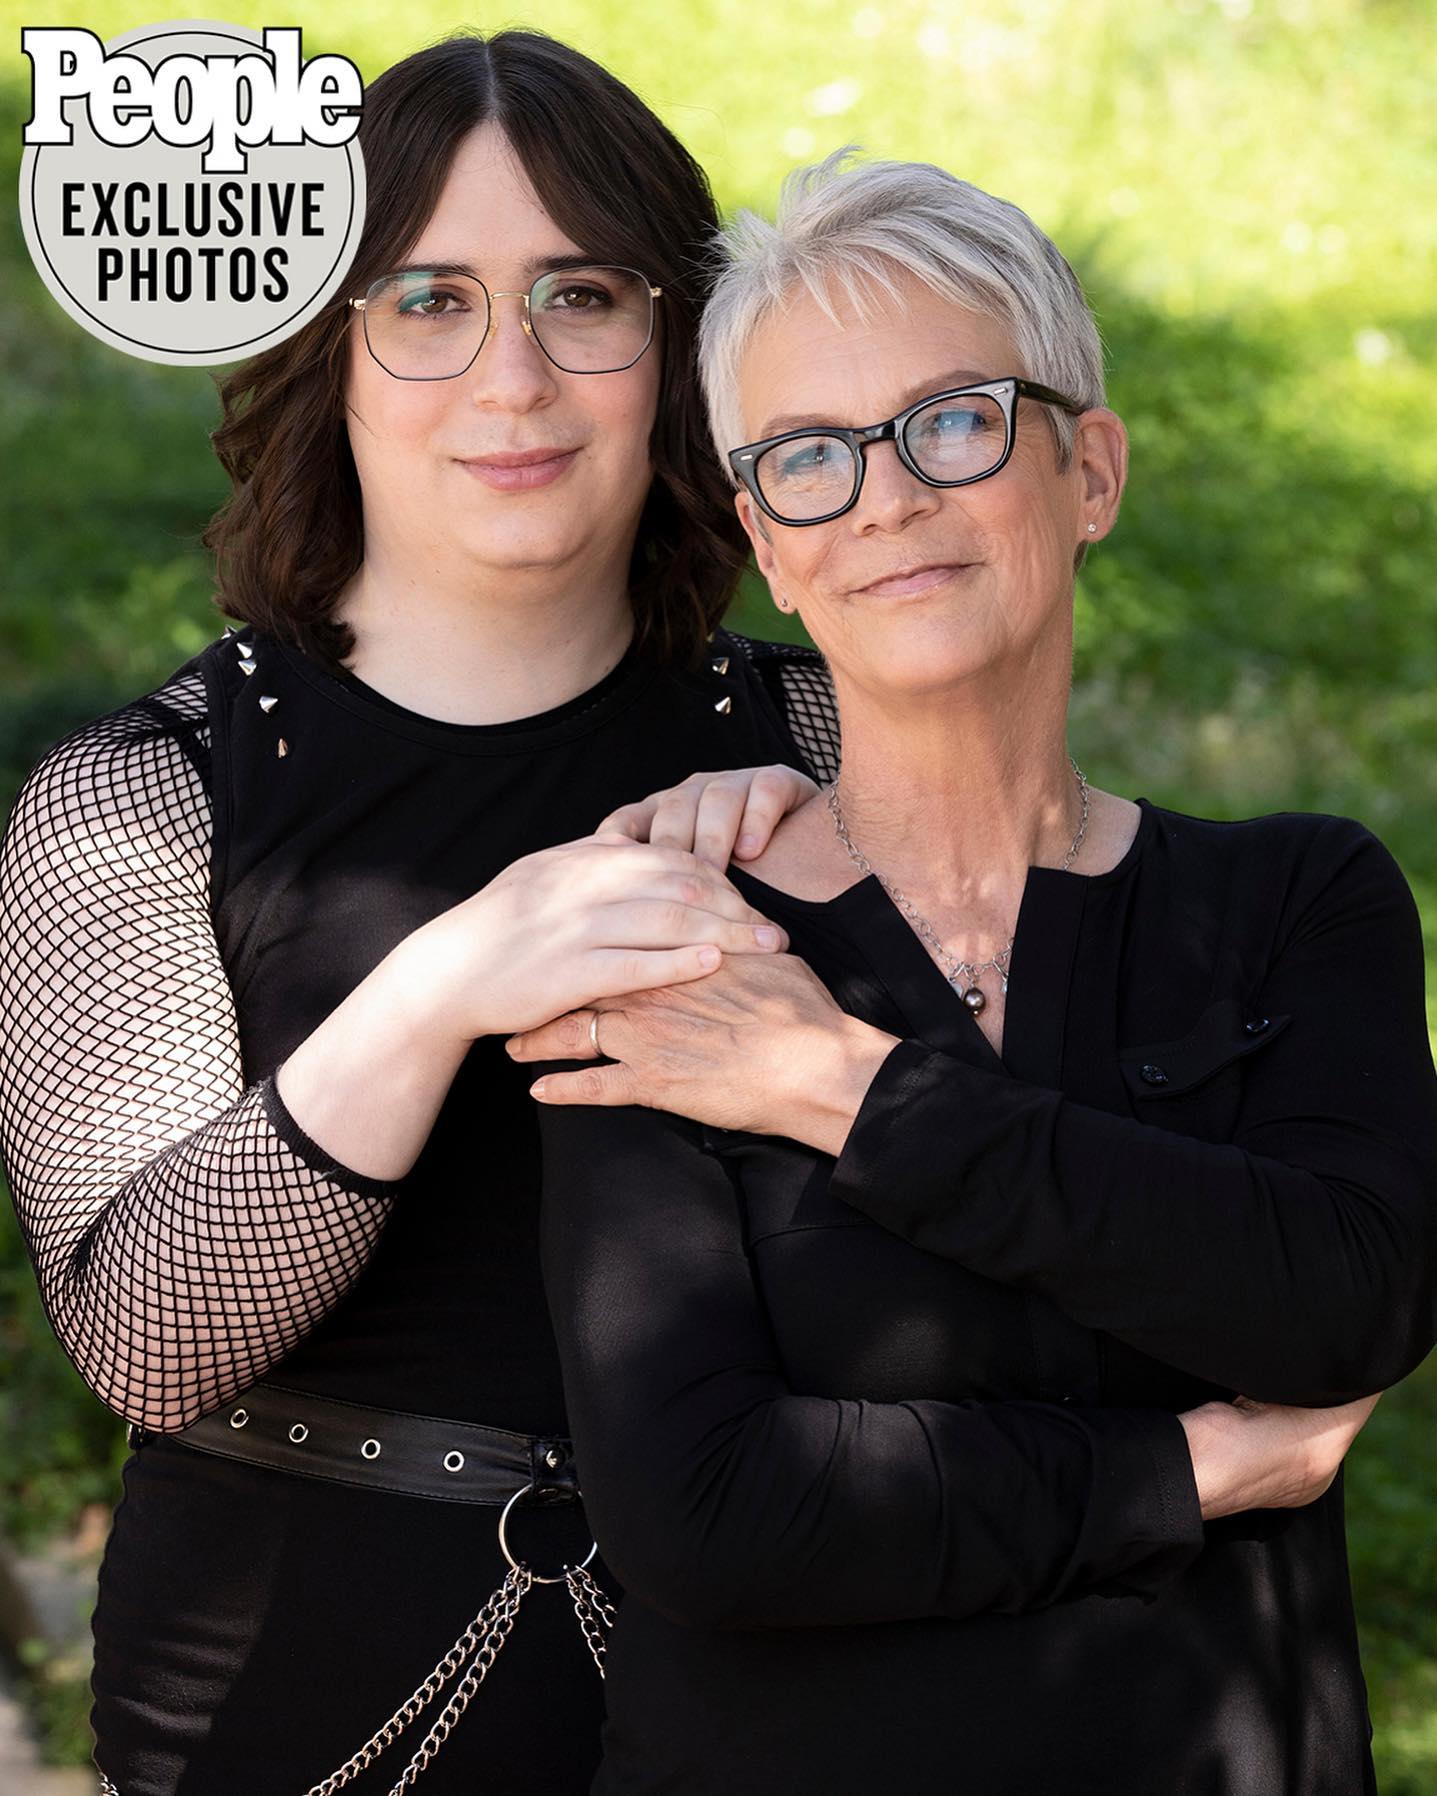 Jamie Lee Curtis’ Daughter Ruby Guest Biography: Age, Net Worth, Parents, Siblings, Spouses, Instagram, Height, Wiki